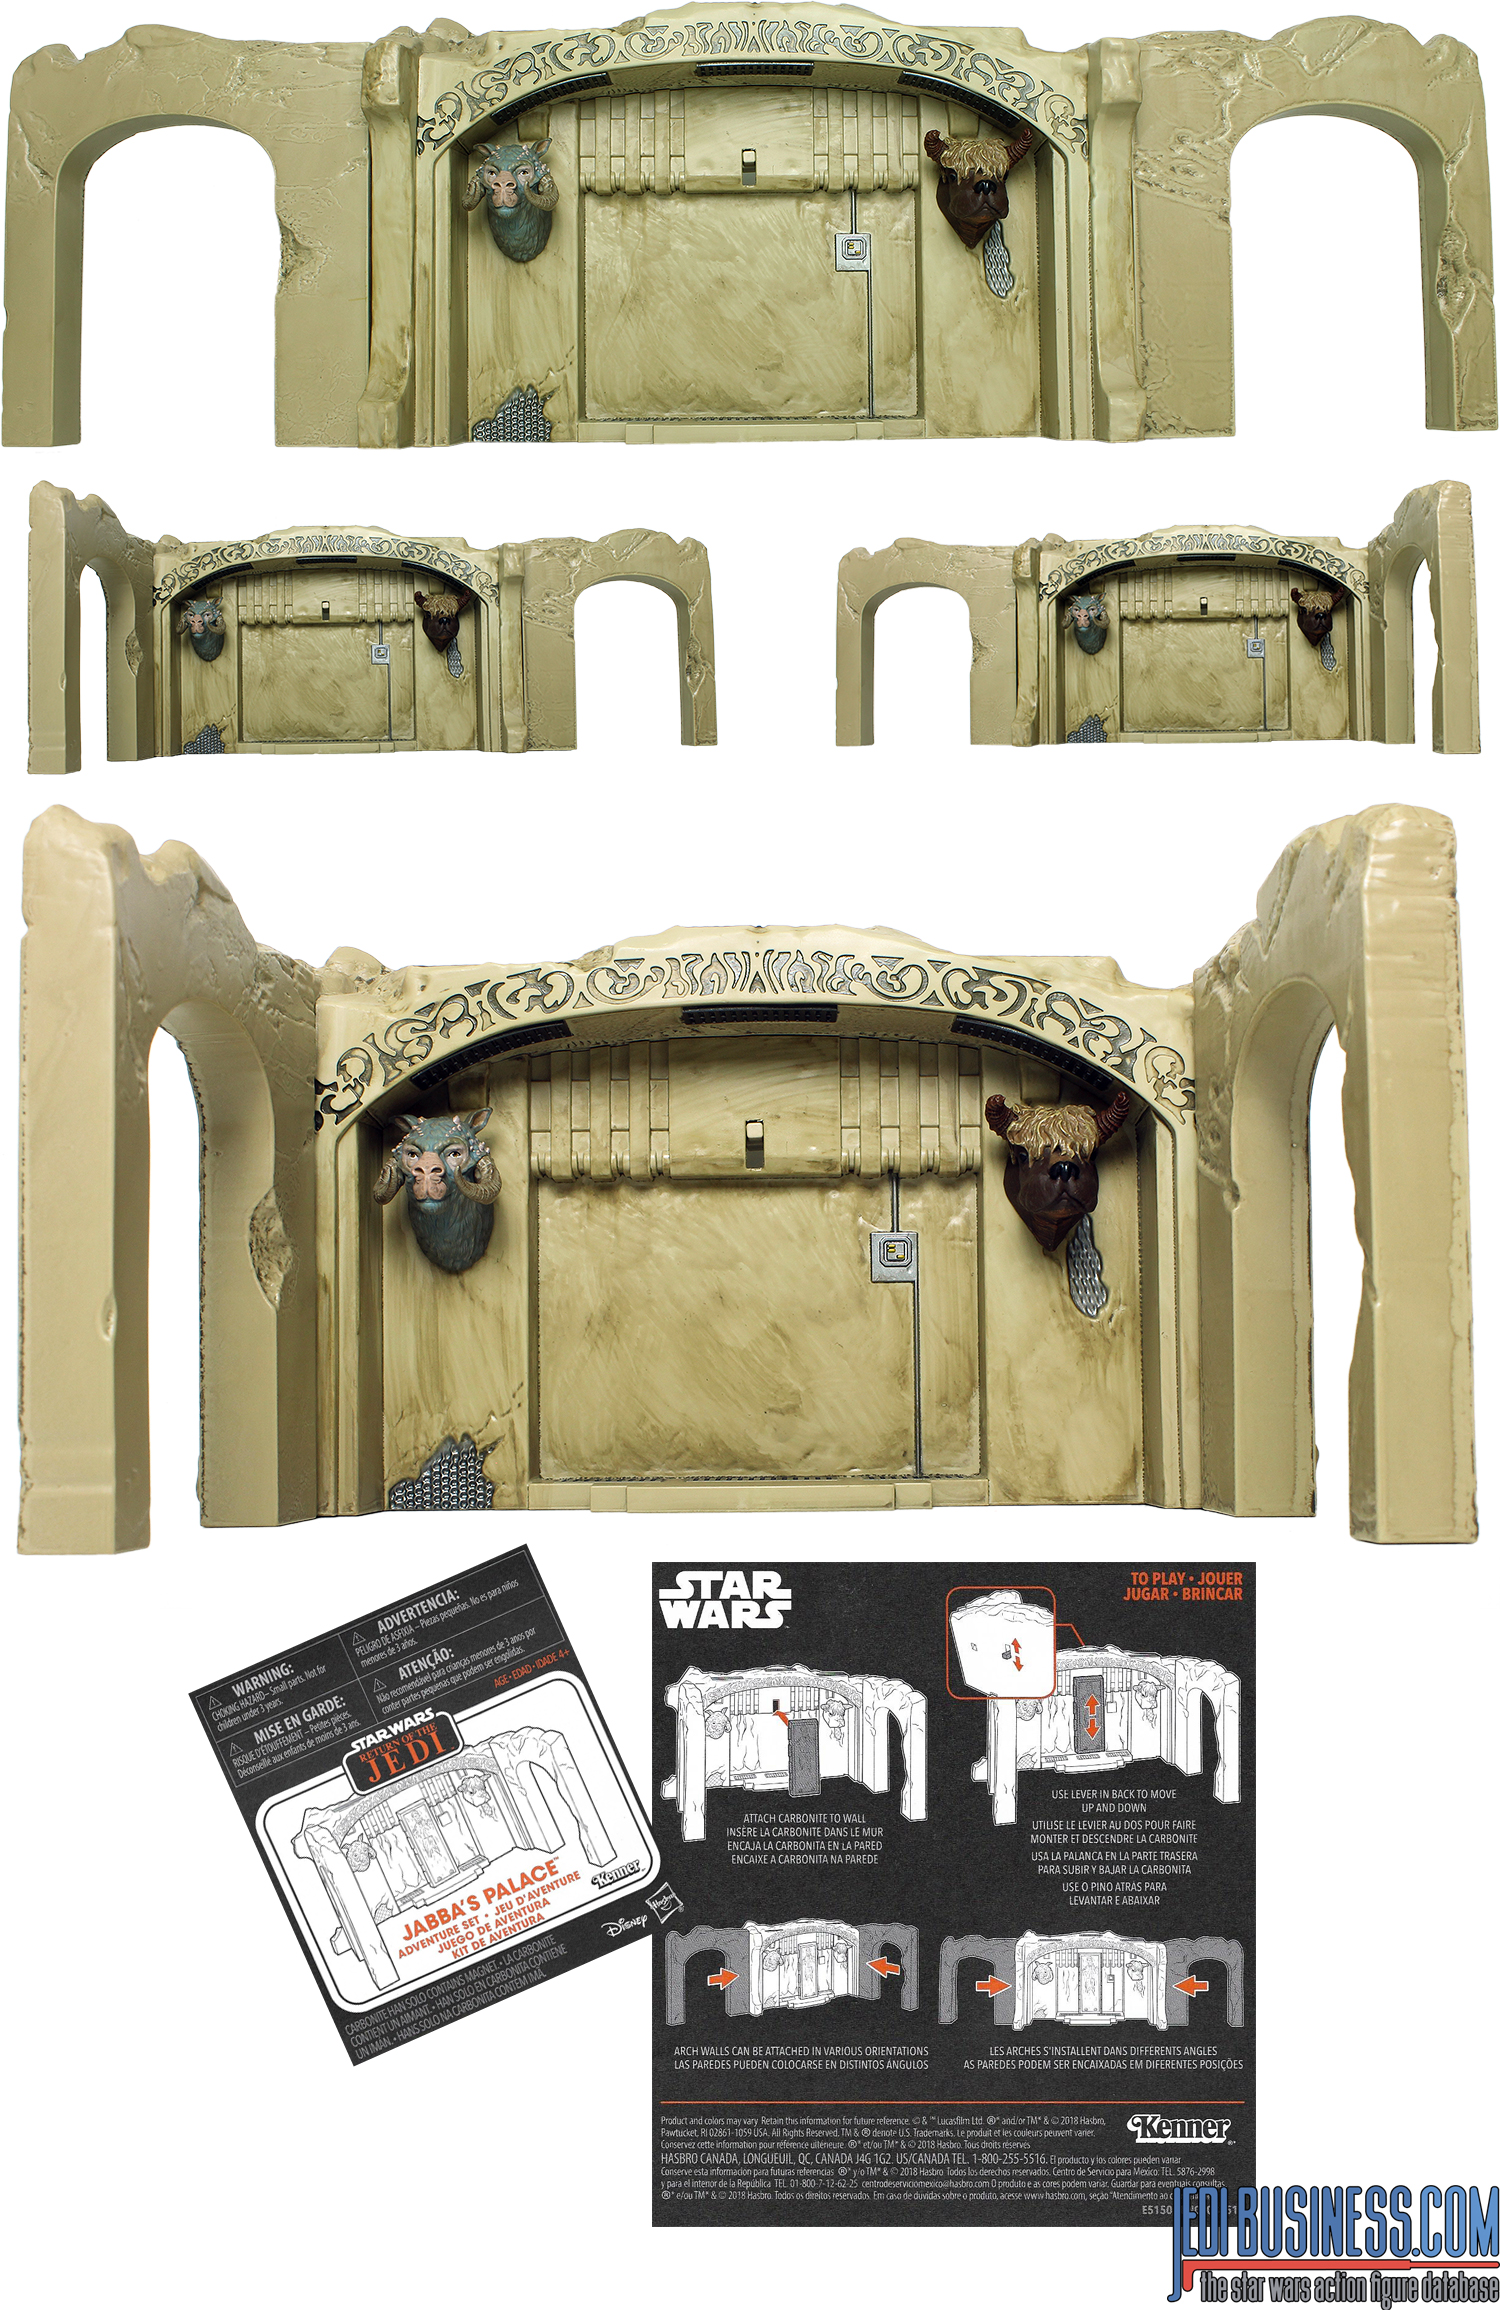 HASBRO STAR WARS VINTAGE COLLECTION JABBA'S PALACE HAN SOLO ADVENTURE PLAYSET 